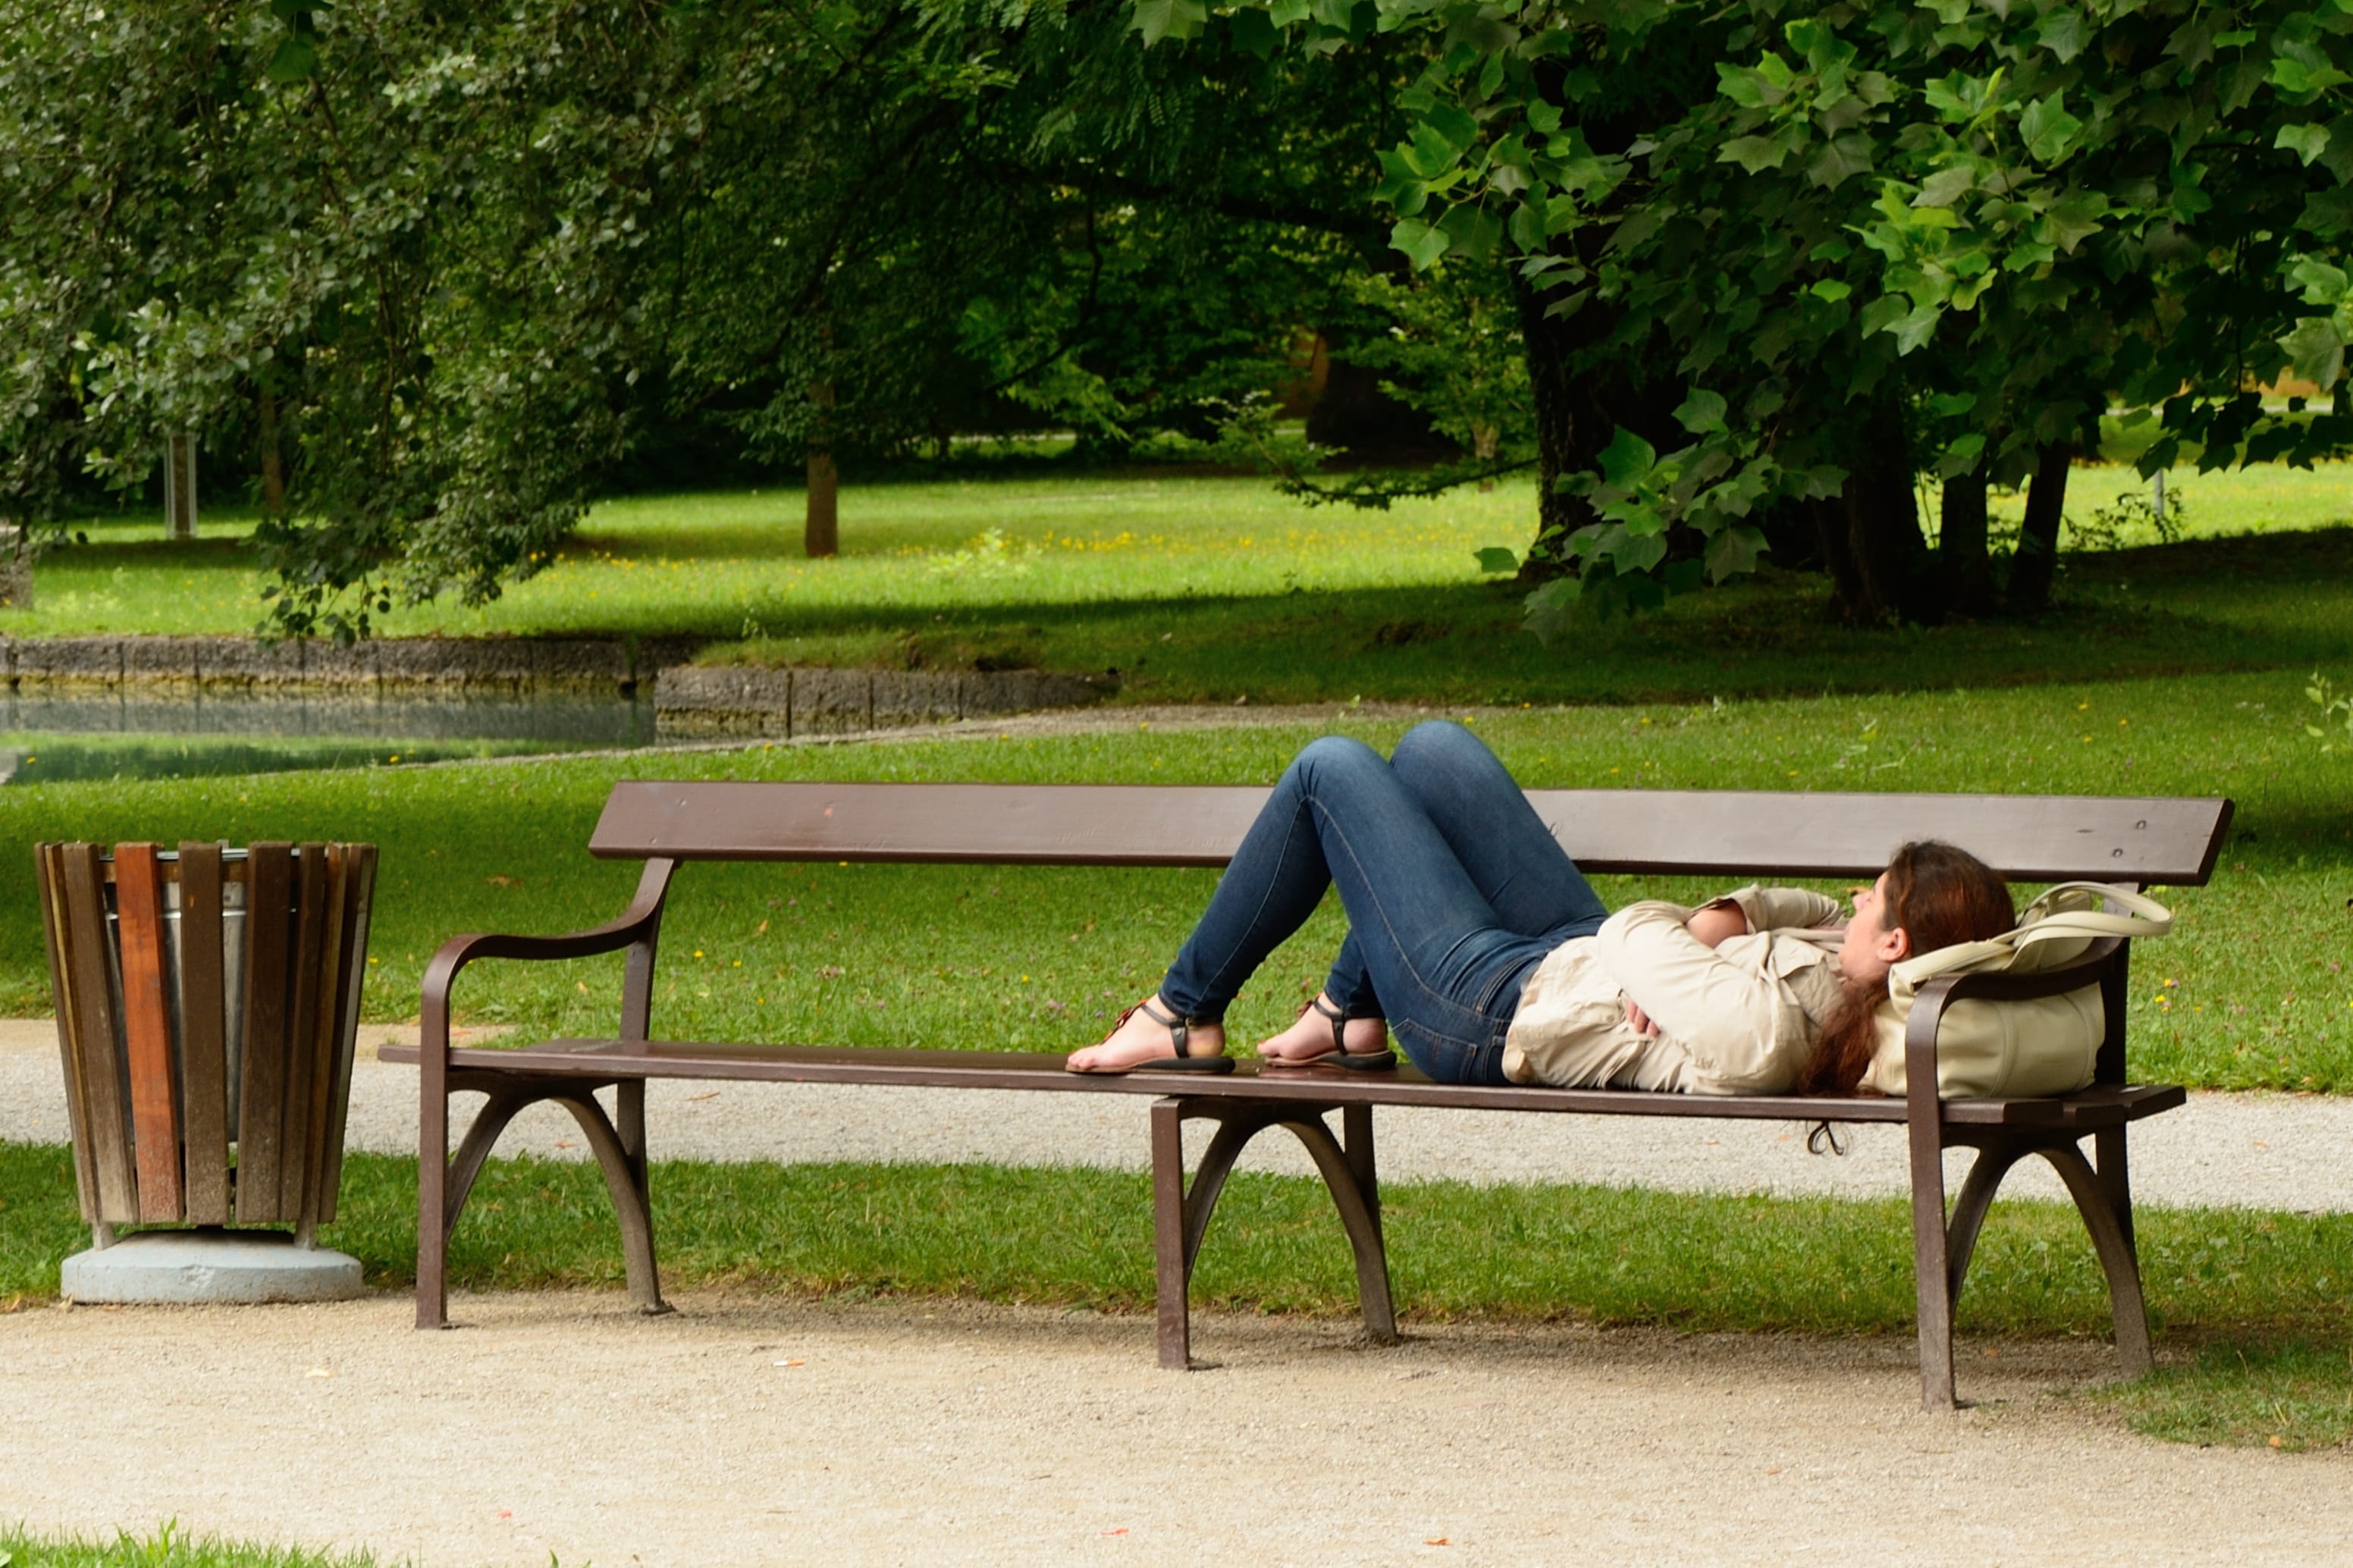 woman sleeping on bench, Bank, Person, Human, Nature, out, resting place